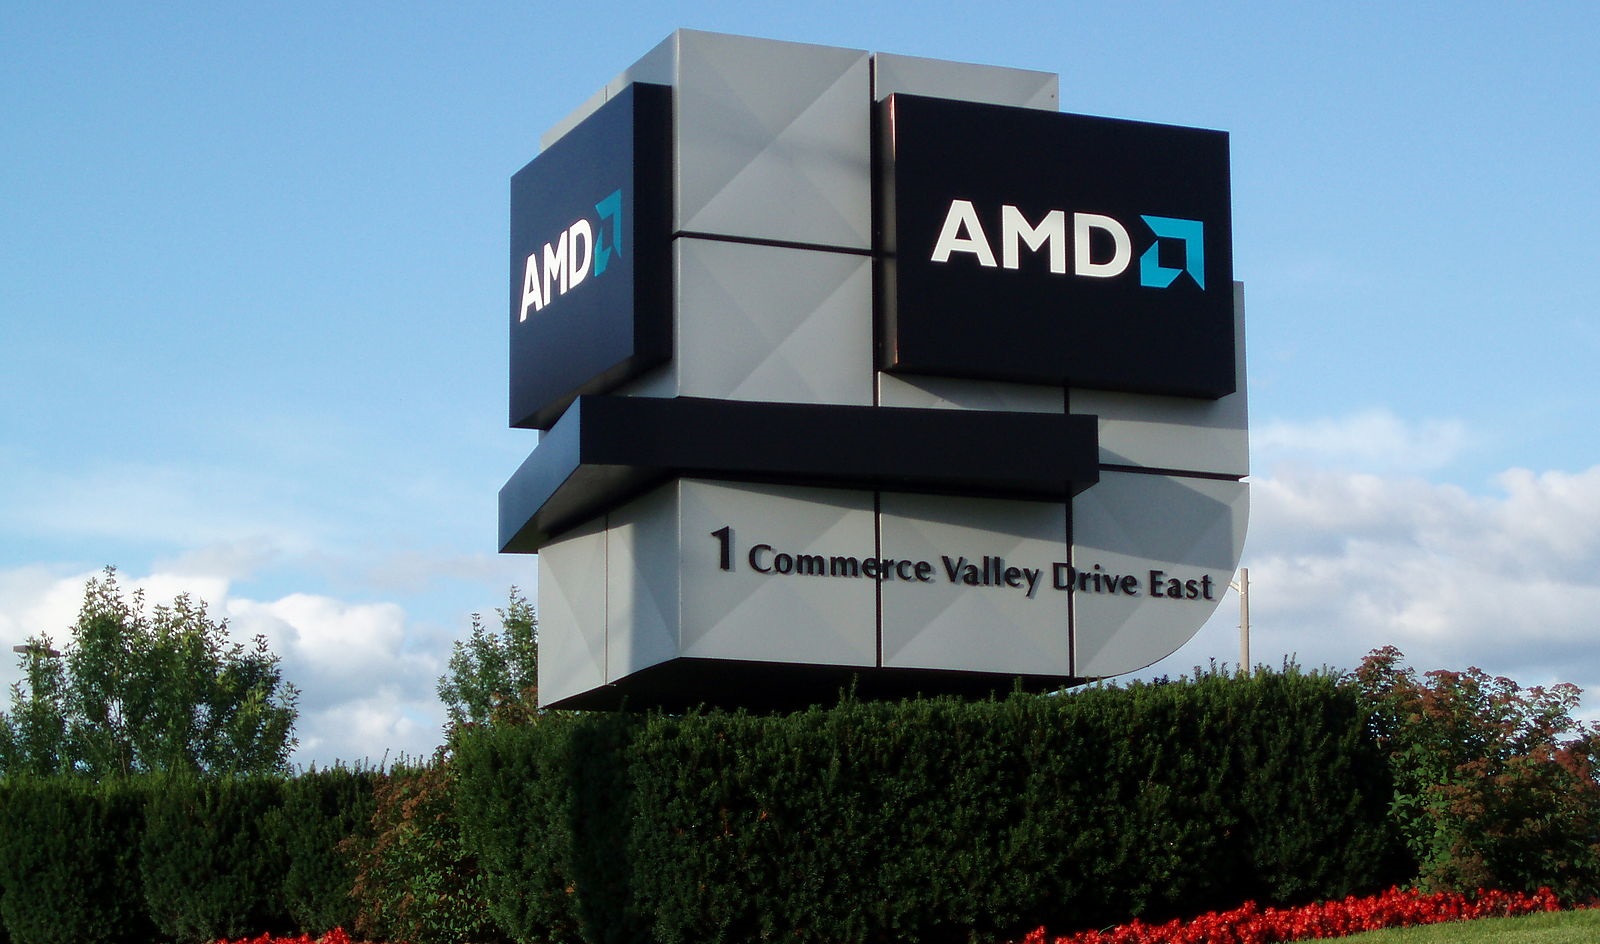 AMD May Soon Become TSMC’s Second-Largest Customer by Revenue